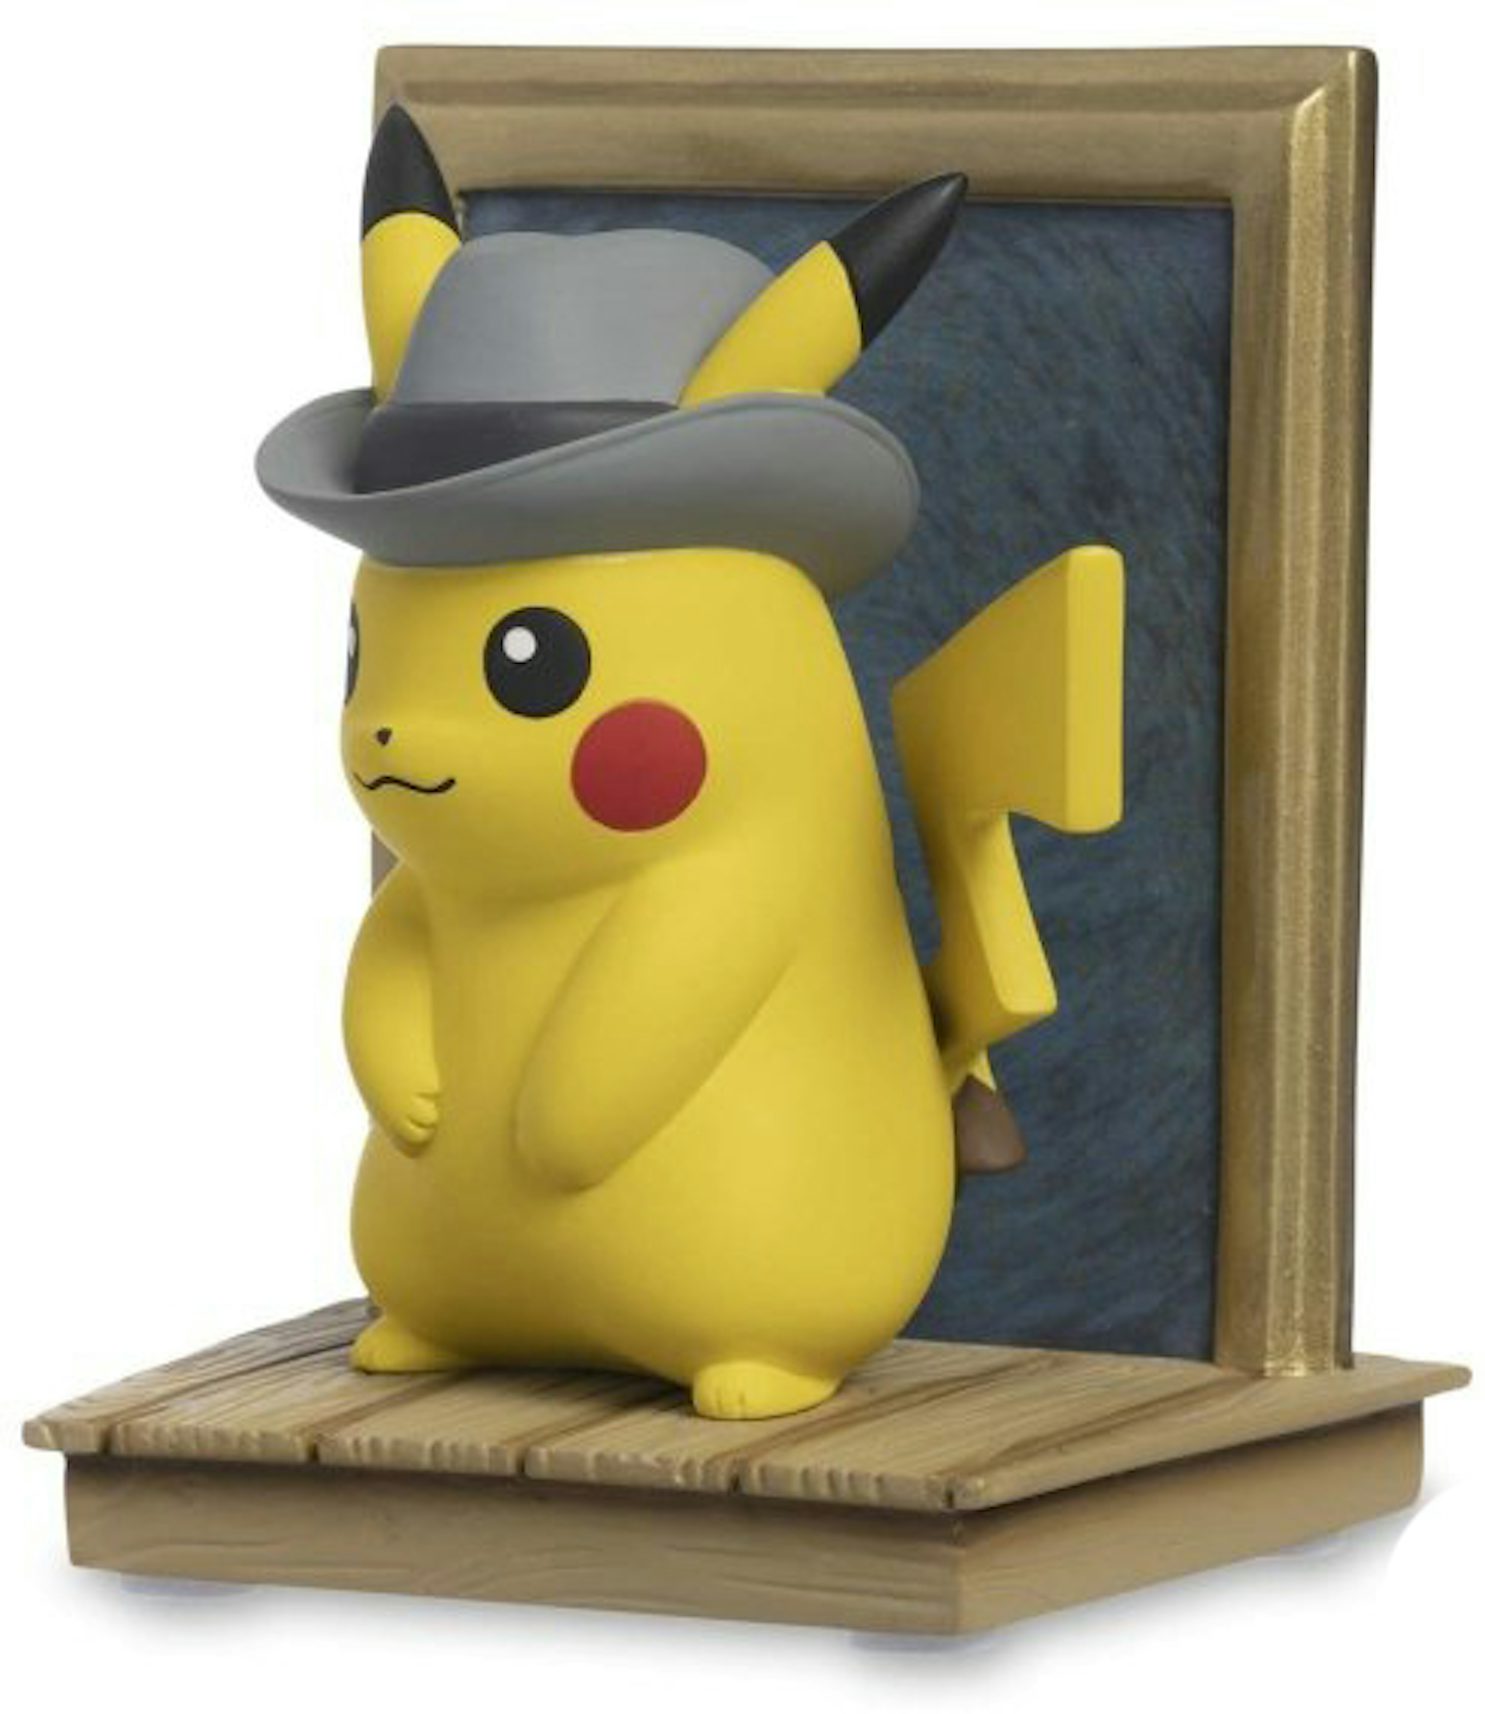 Professional product photo, painted die-cast pikachu figurine